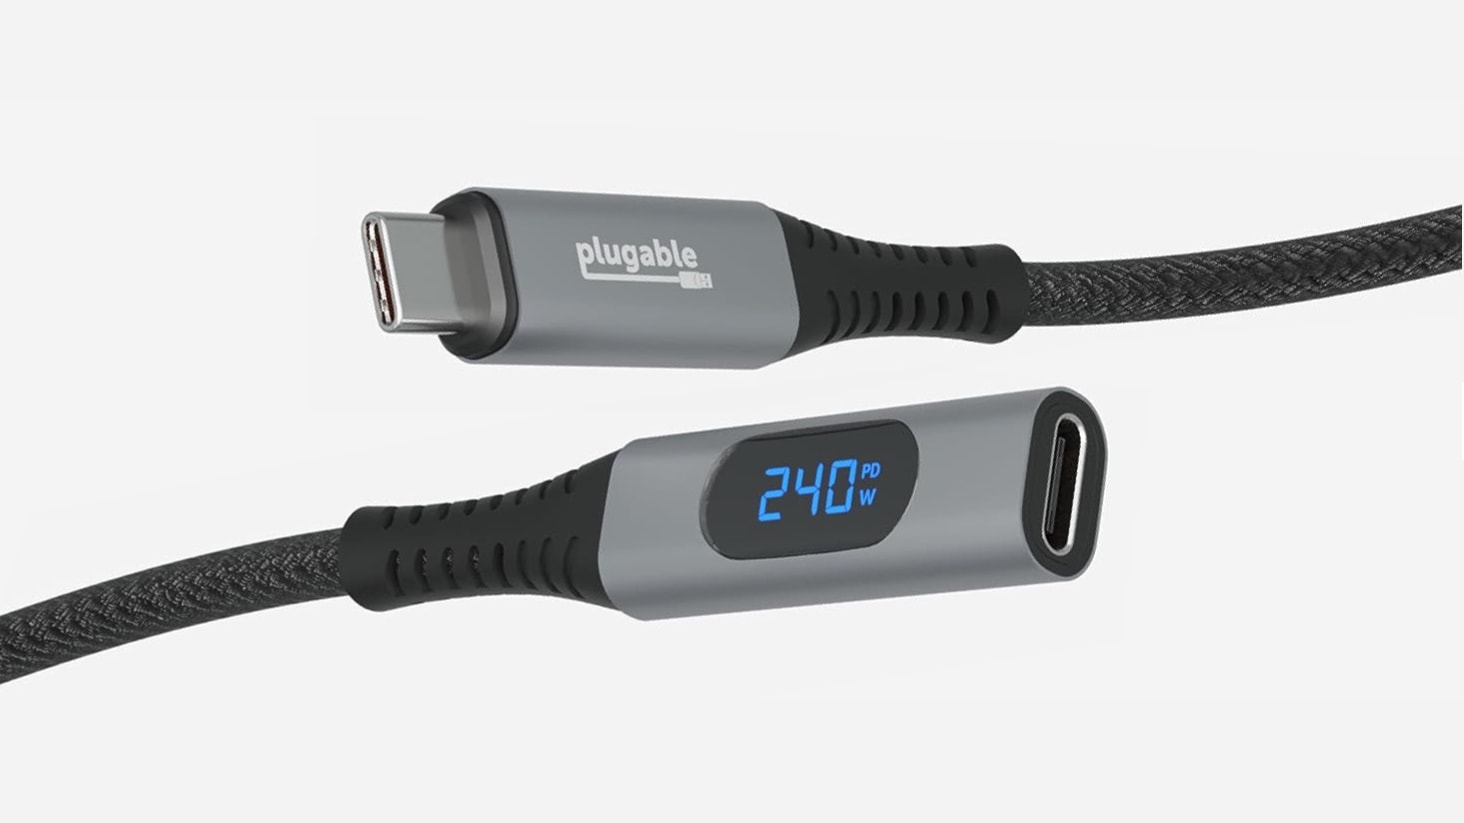 Handy USB-C extension cable boasts built-in power meter